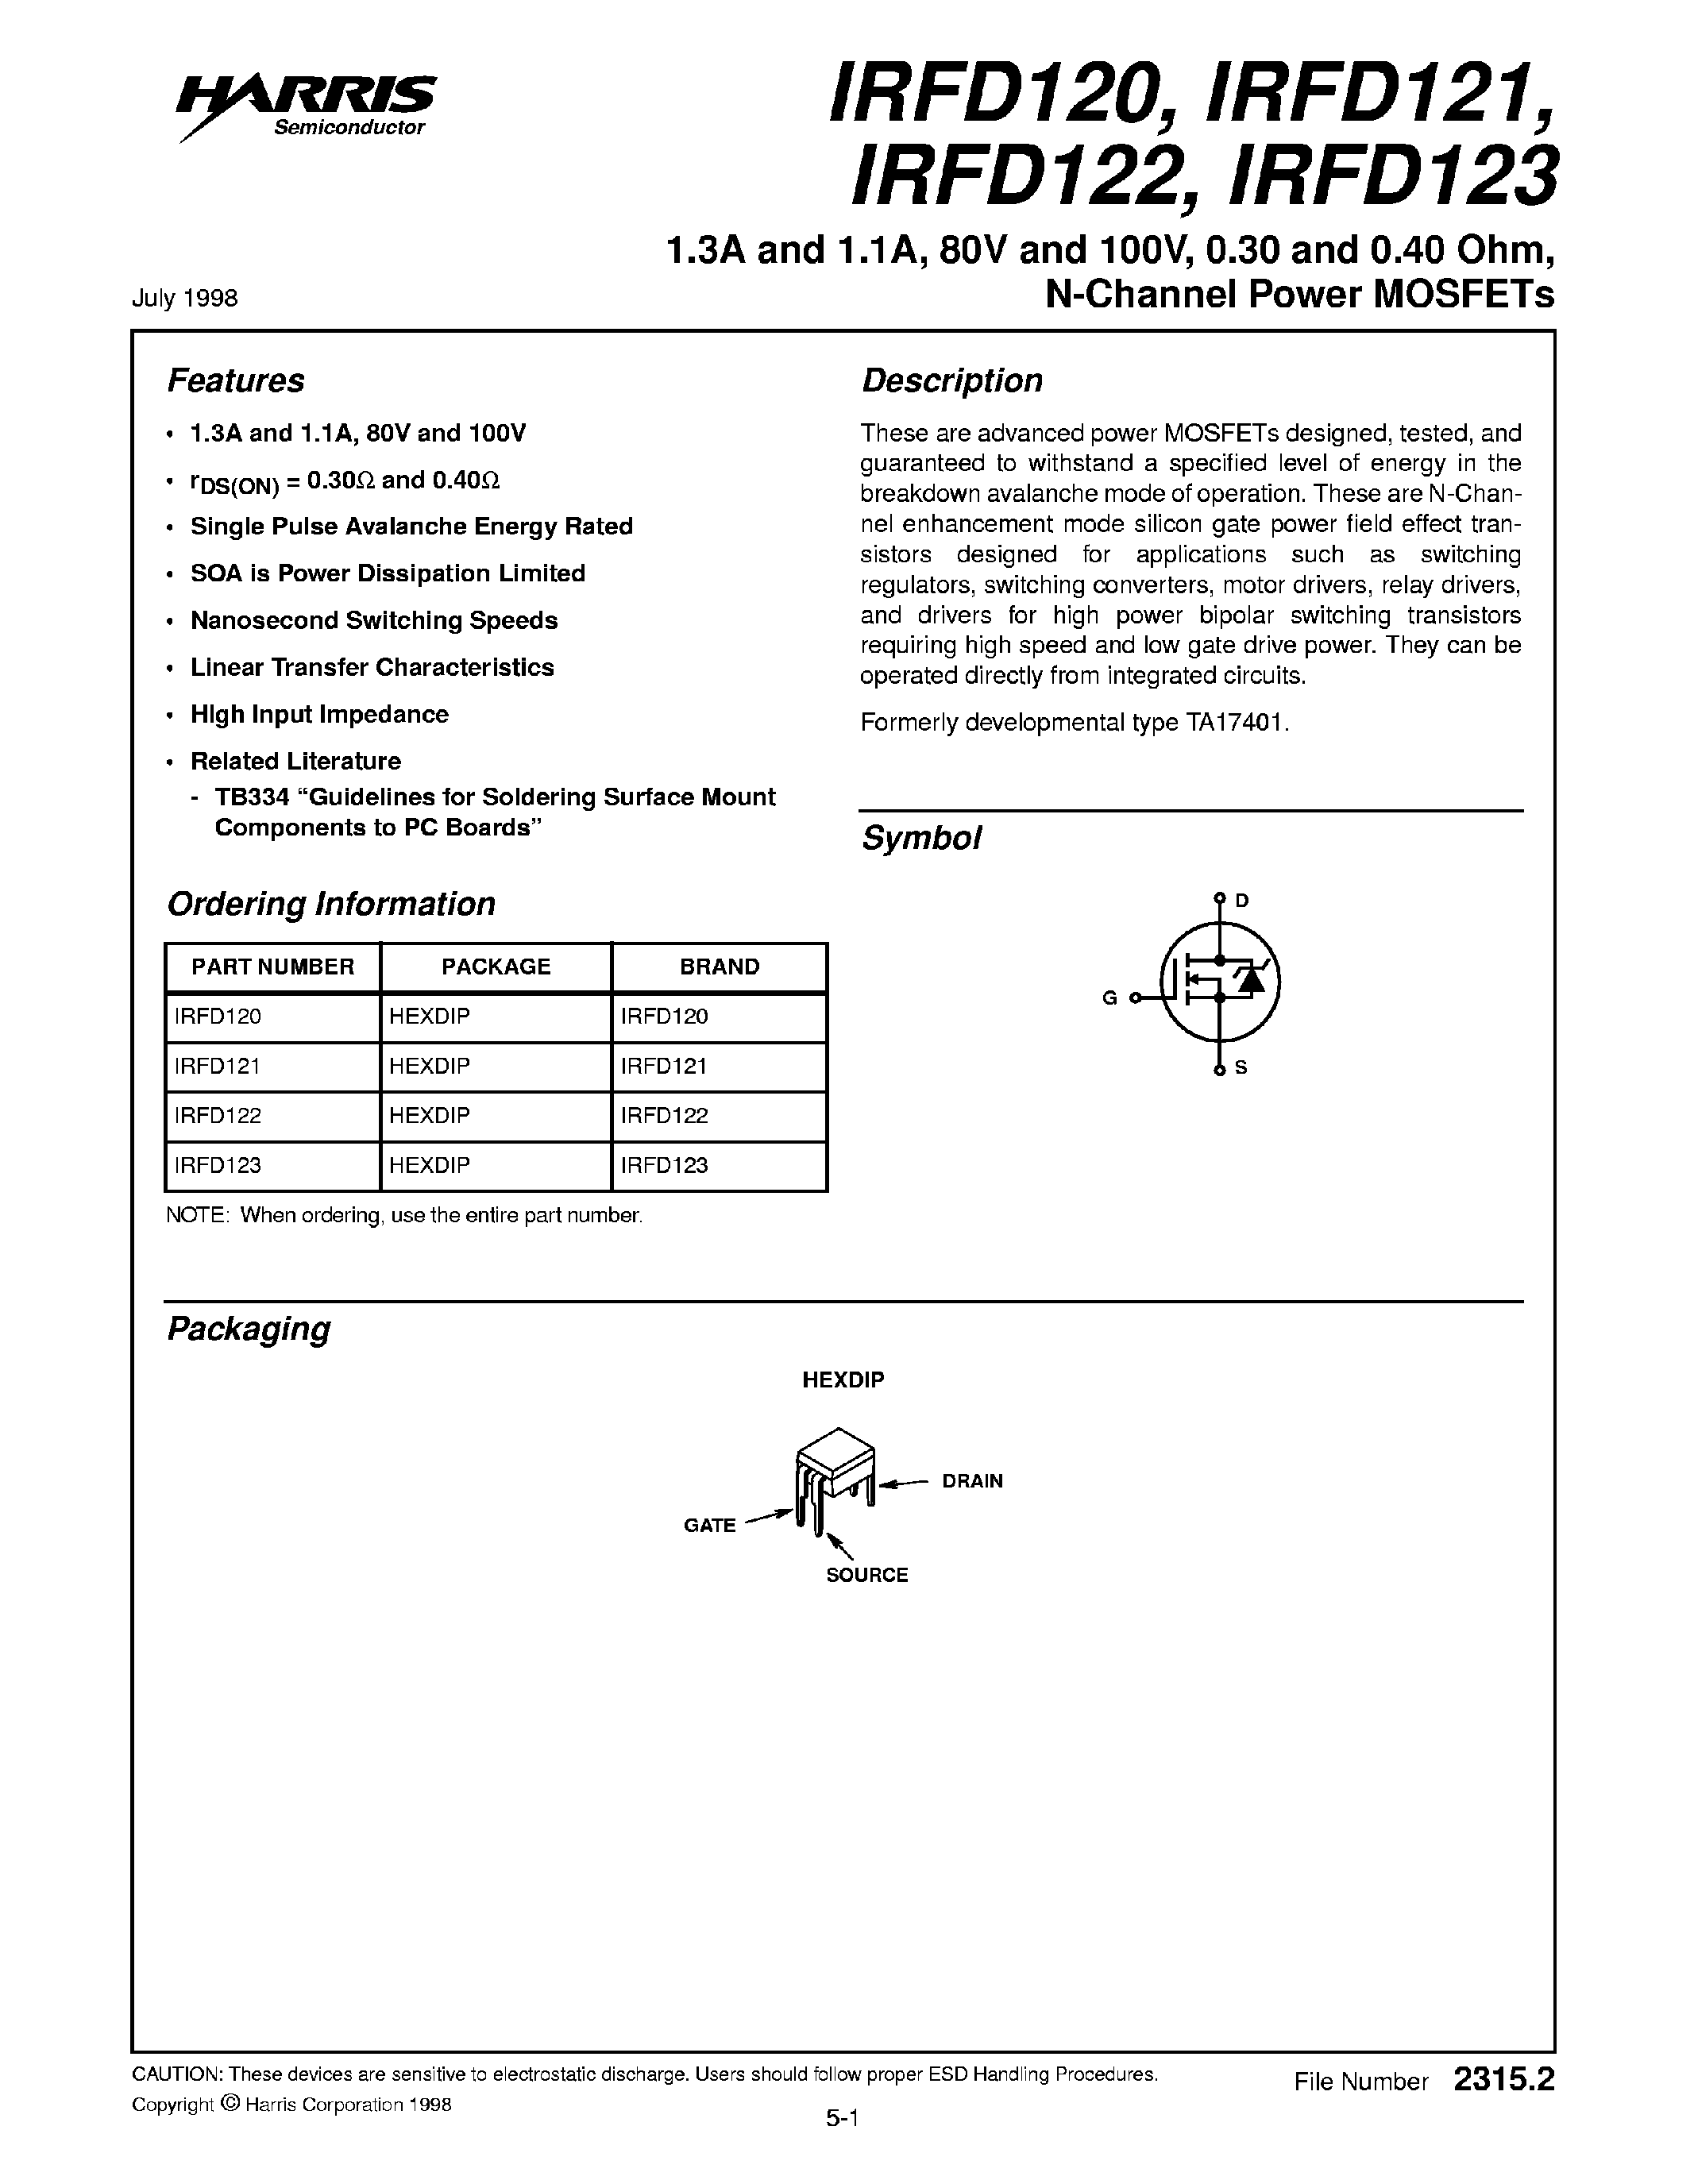 Datasheet IRFD120 - (IRFD120 / IRFD121 / IRFD122 / IRFD123) N-Channel Power MOSFETs page 1